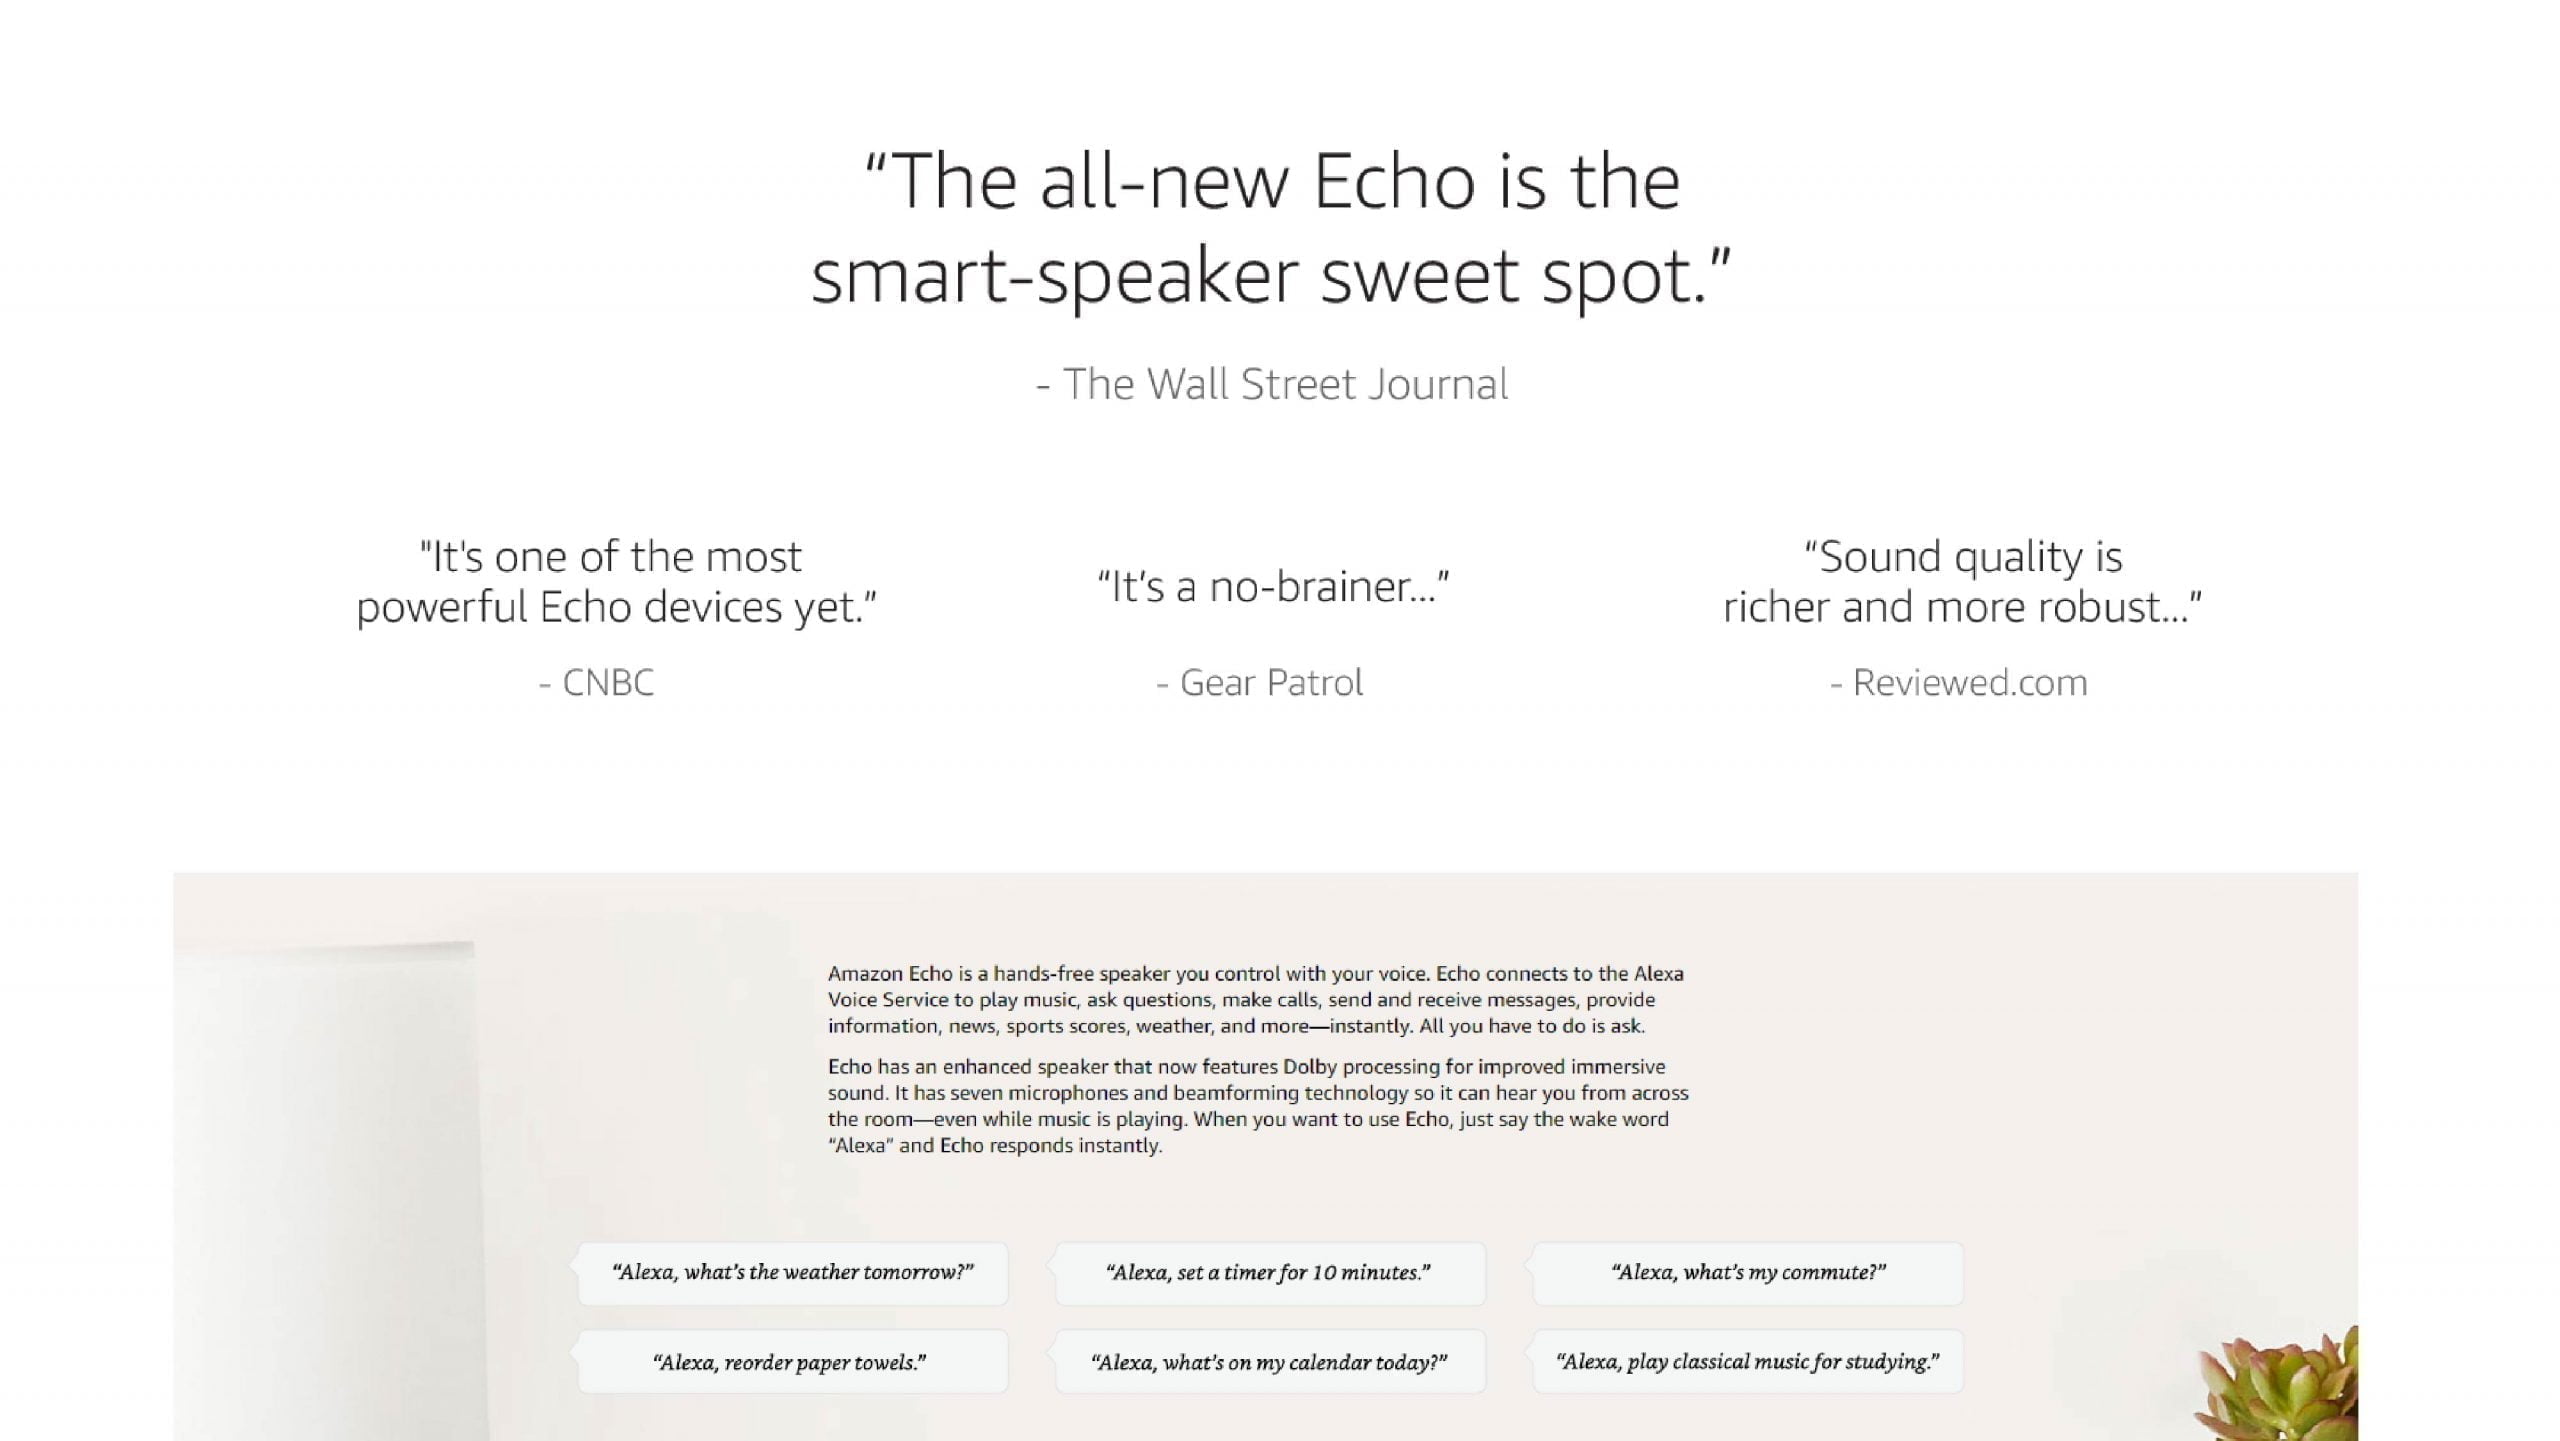 Echo 01 Scaled Amazon Https://Www.youtube.com/Watch?V=Mb516V-F2F0 Echo Echo (2Nd Generation) - Smart Speaker With Alexa And Dolby Processing - Limited Edition Oak Finish